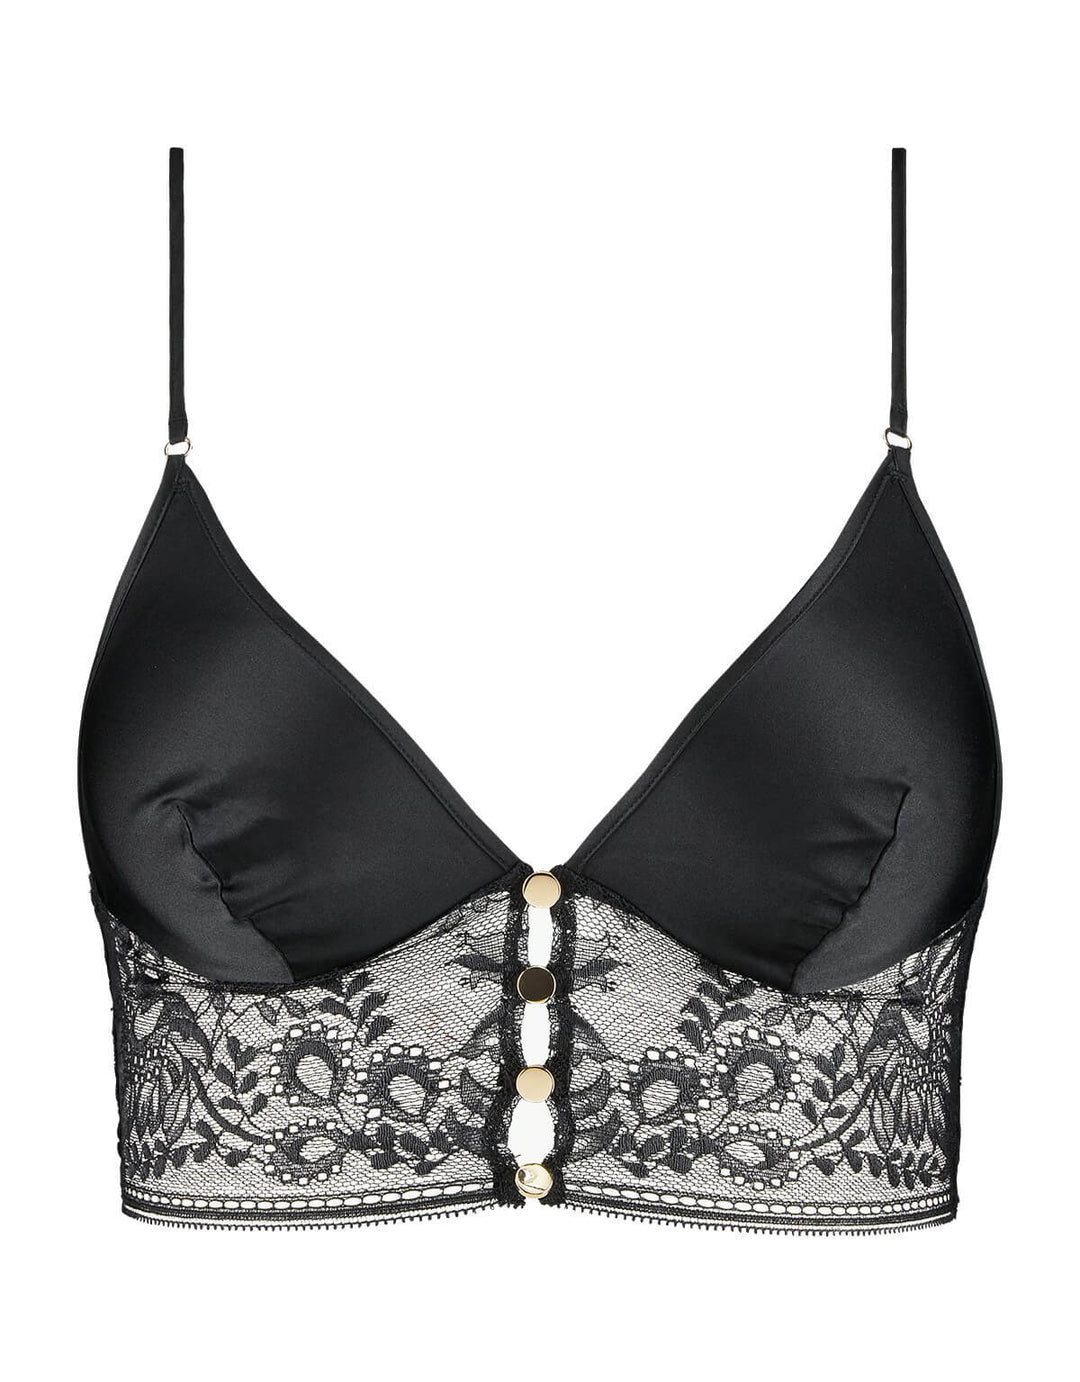 Aubade Midnight Whisper black triangle bra with stretch silk, sheer lace longline band, and small front buttons.